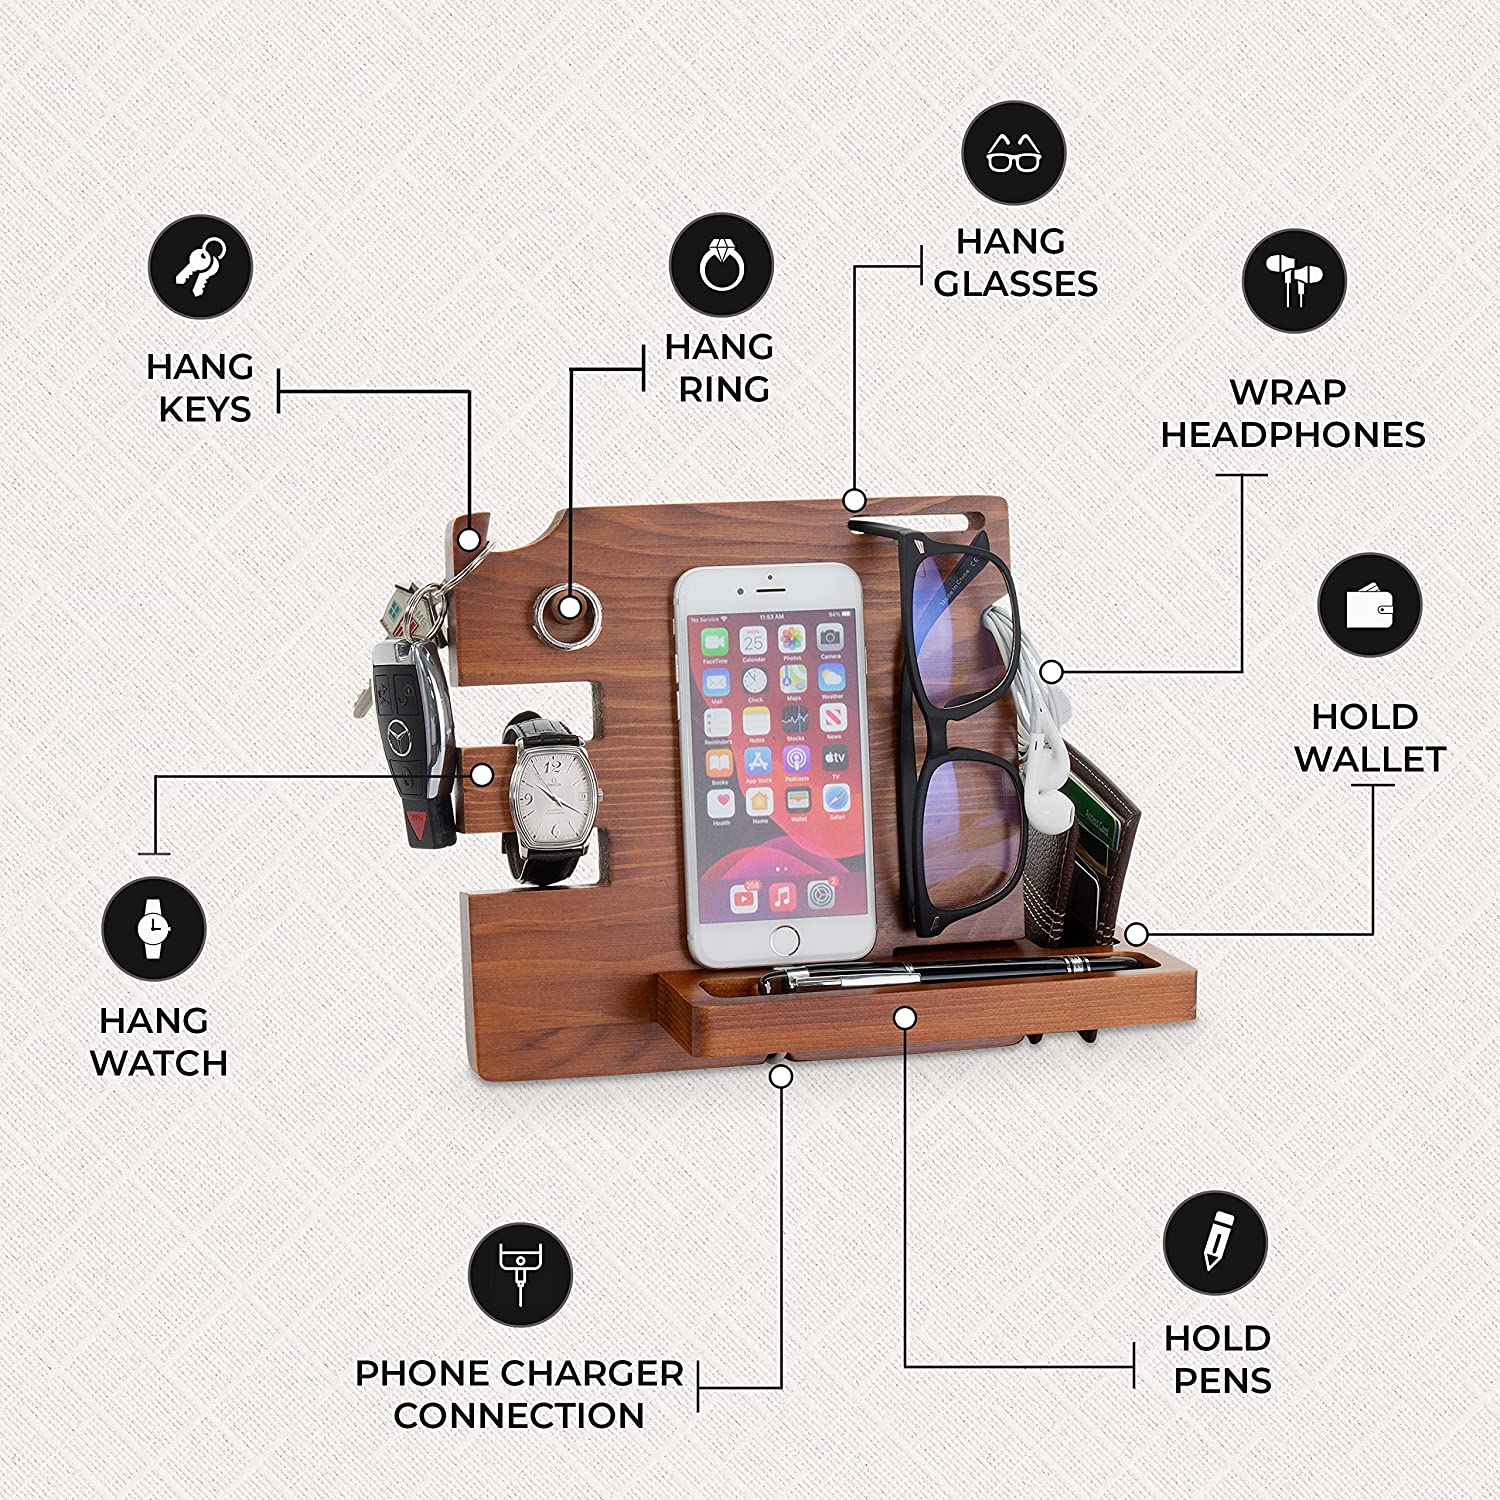 Review of Wooden Docking Station and Nightstand Organizer for Men by Peraco